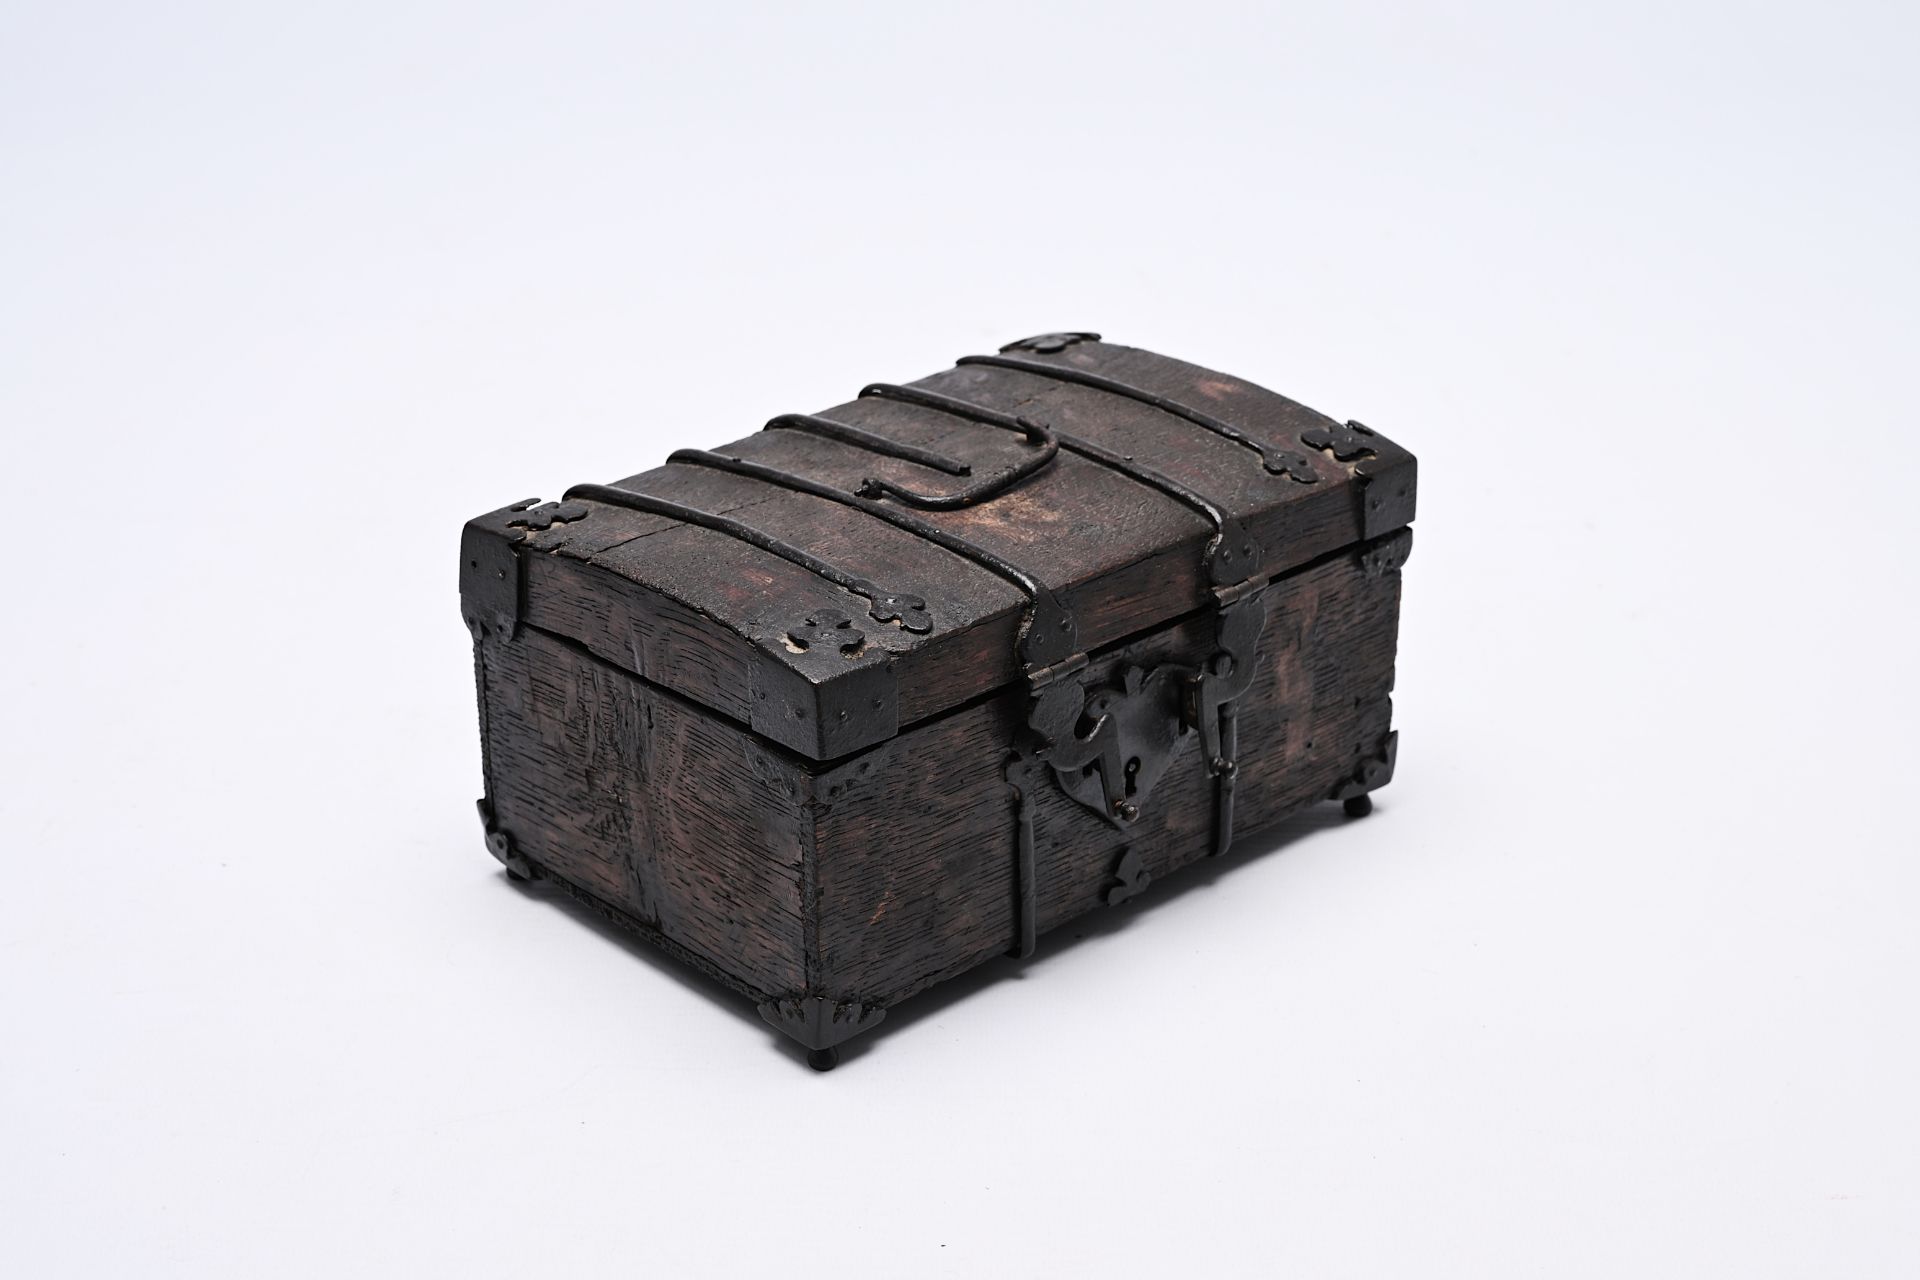 A wooden chest with iron mounts, Western Europe, 16th C.